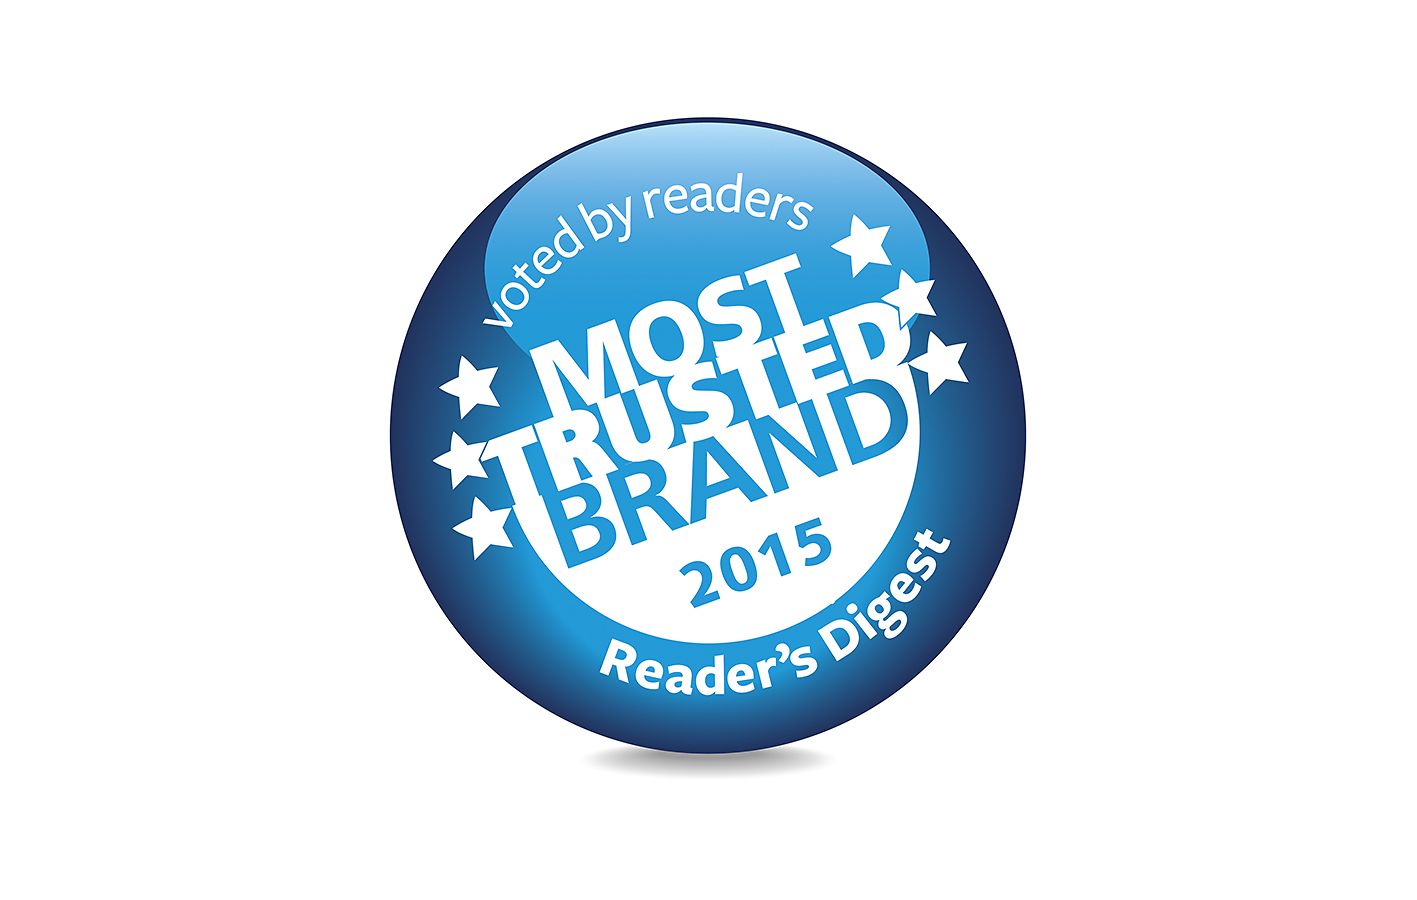 Logo Most Trusted Brand 2015